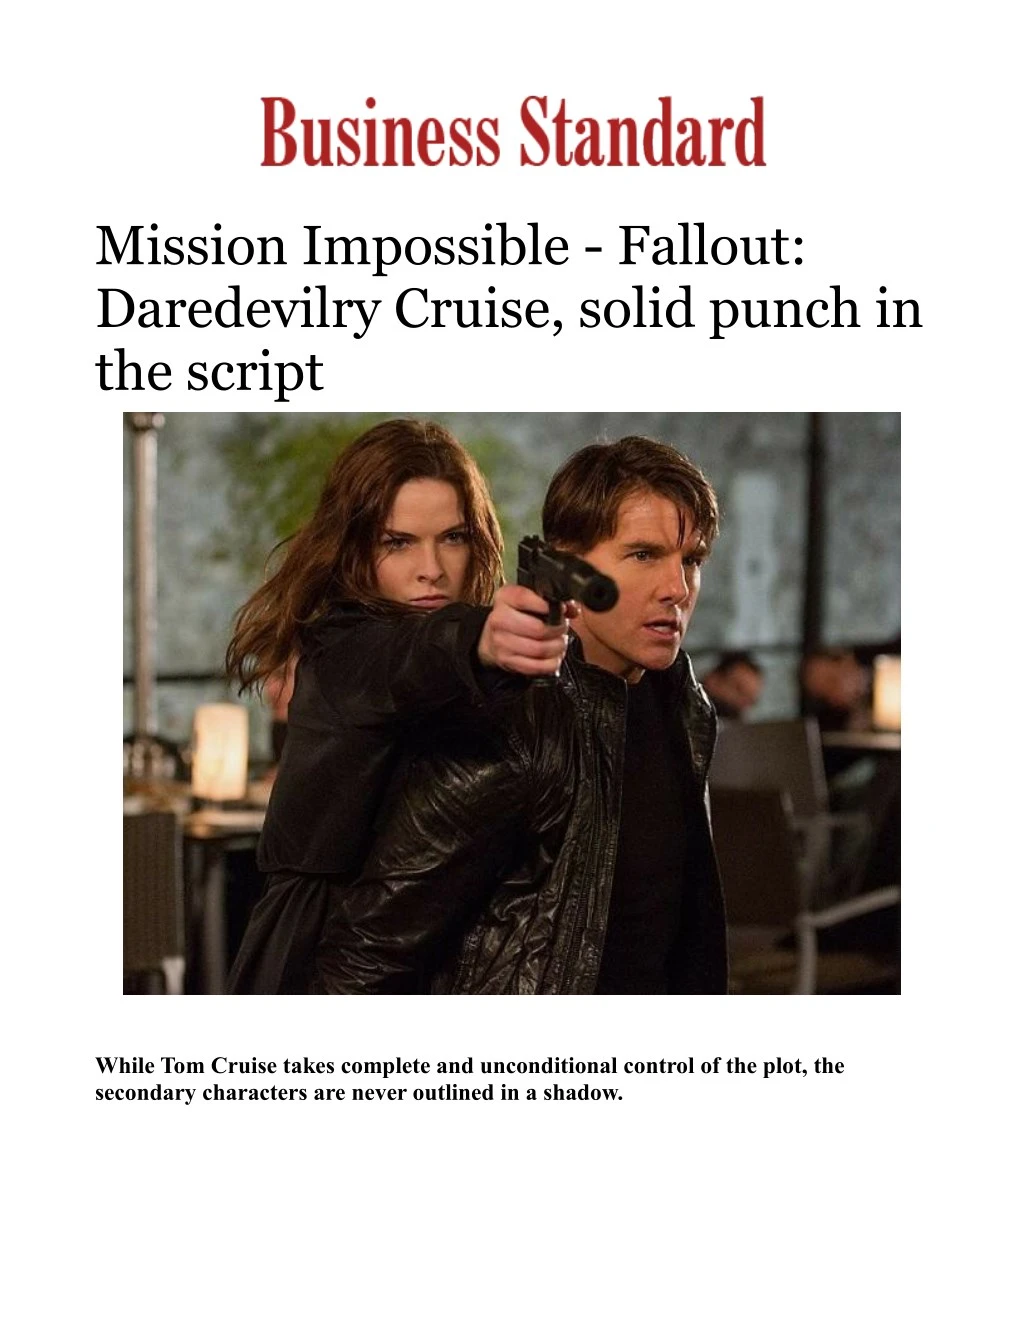 mission impossible fallout daredevilry cruise